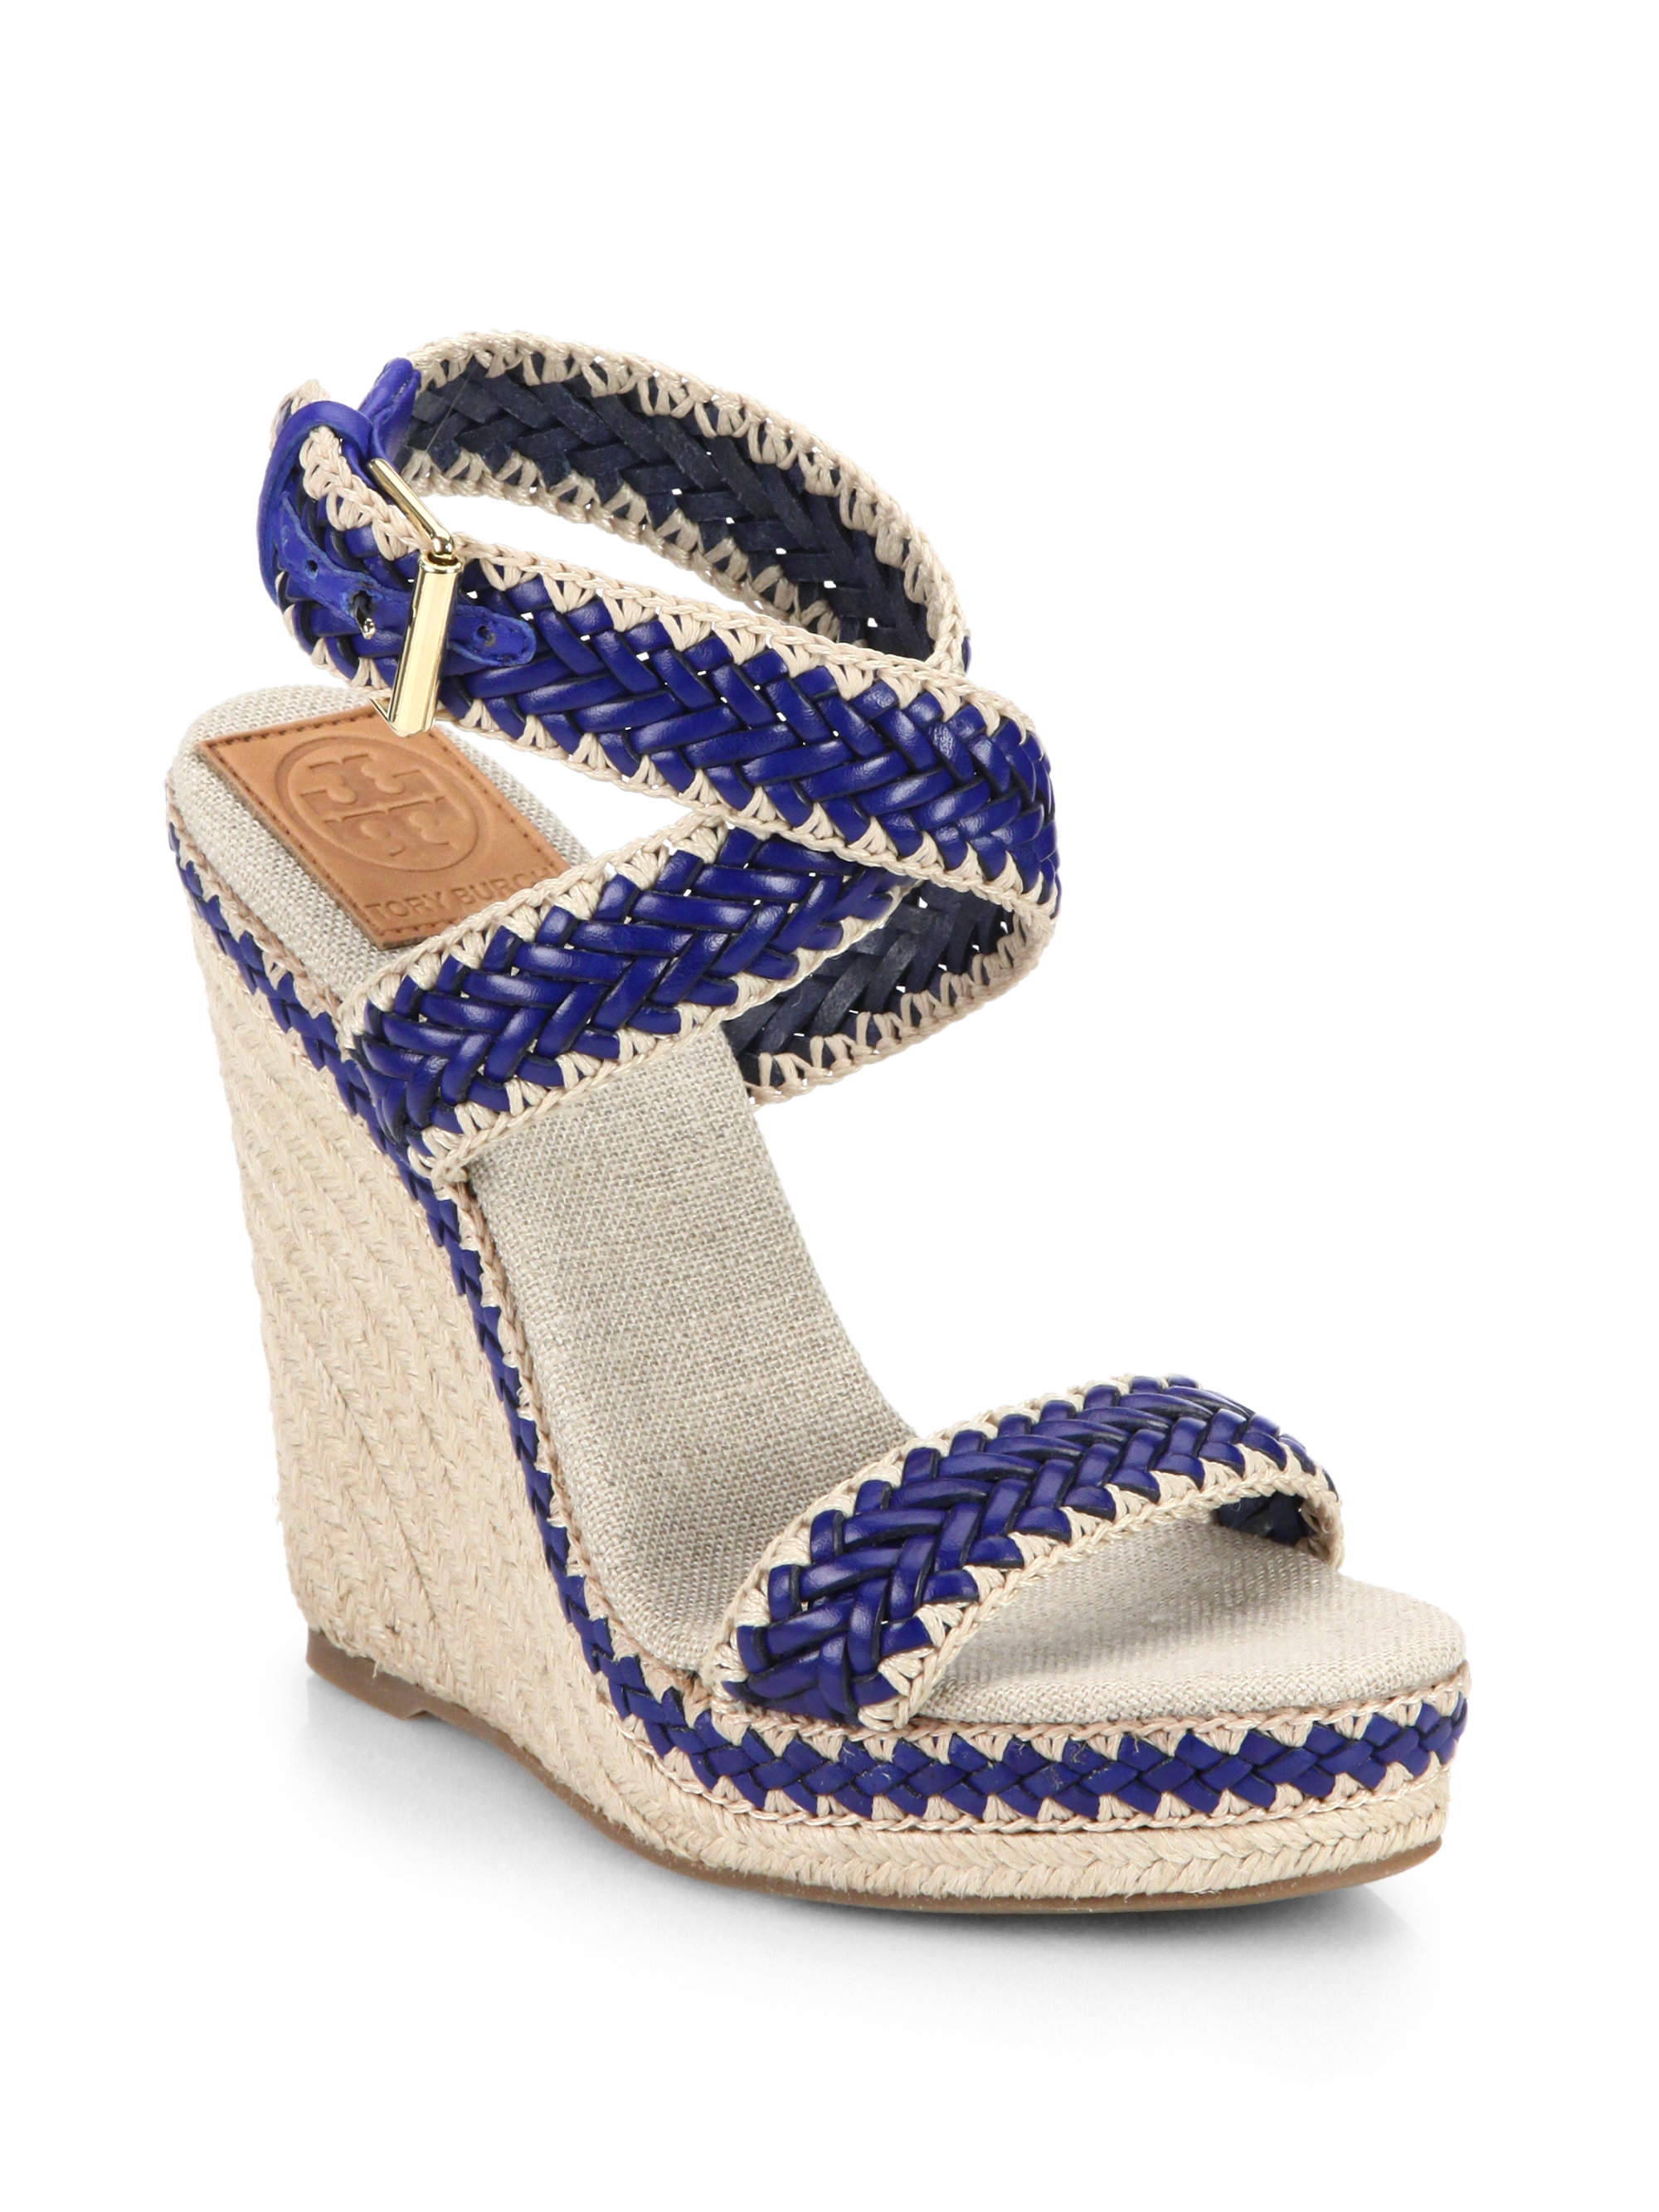 blue and white wedges